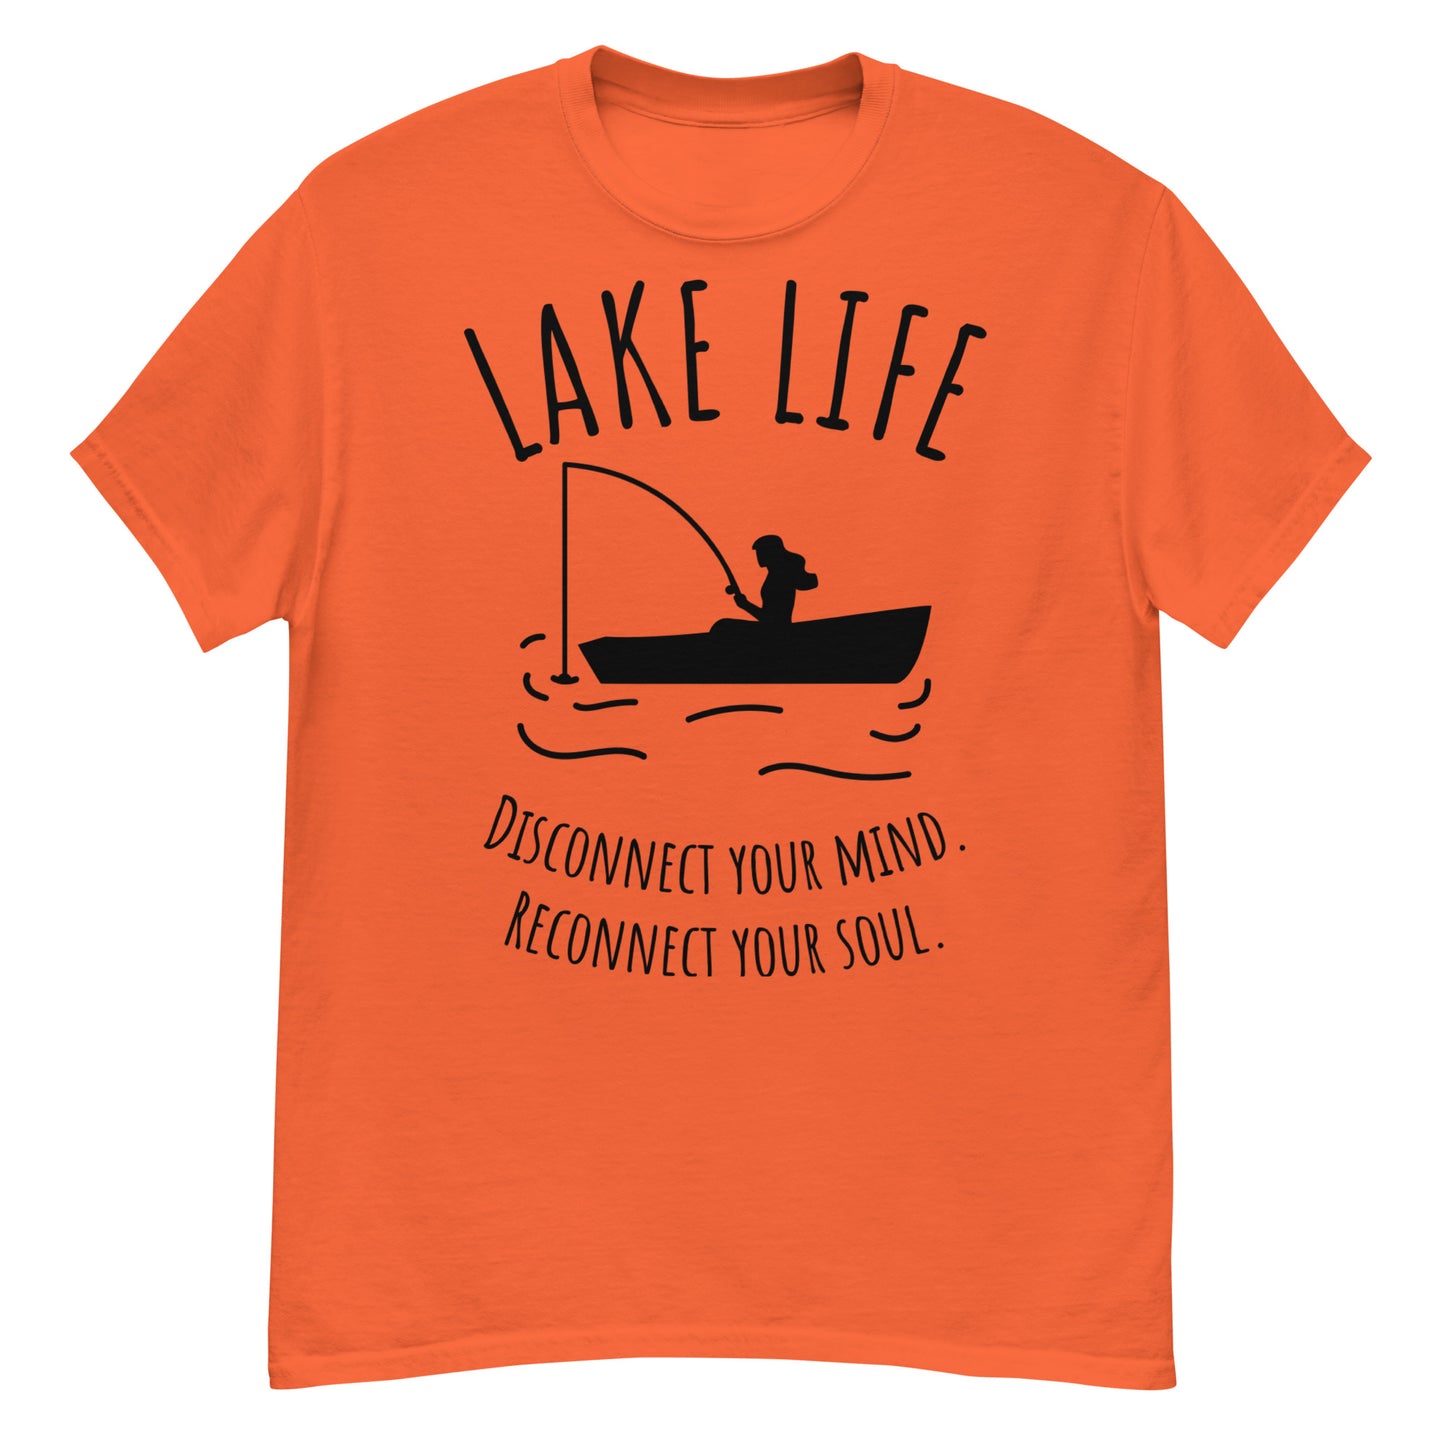 Lake Life - Disconnect your mind, reconnect your soul t-shirt